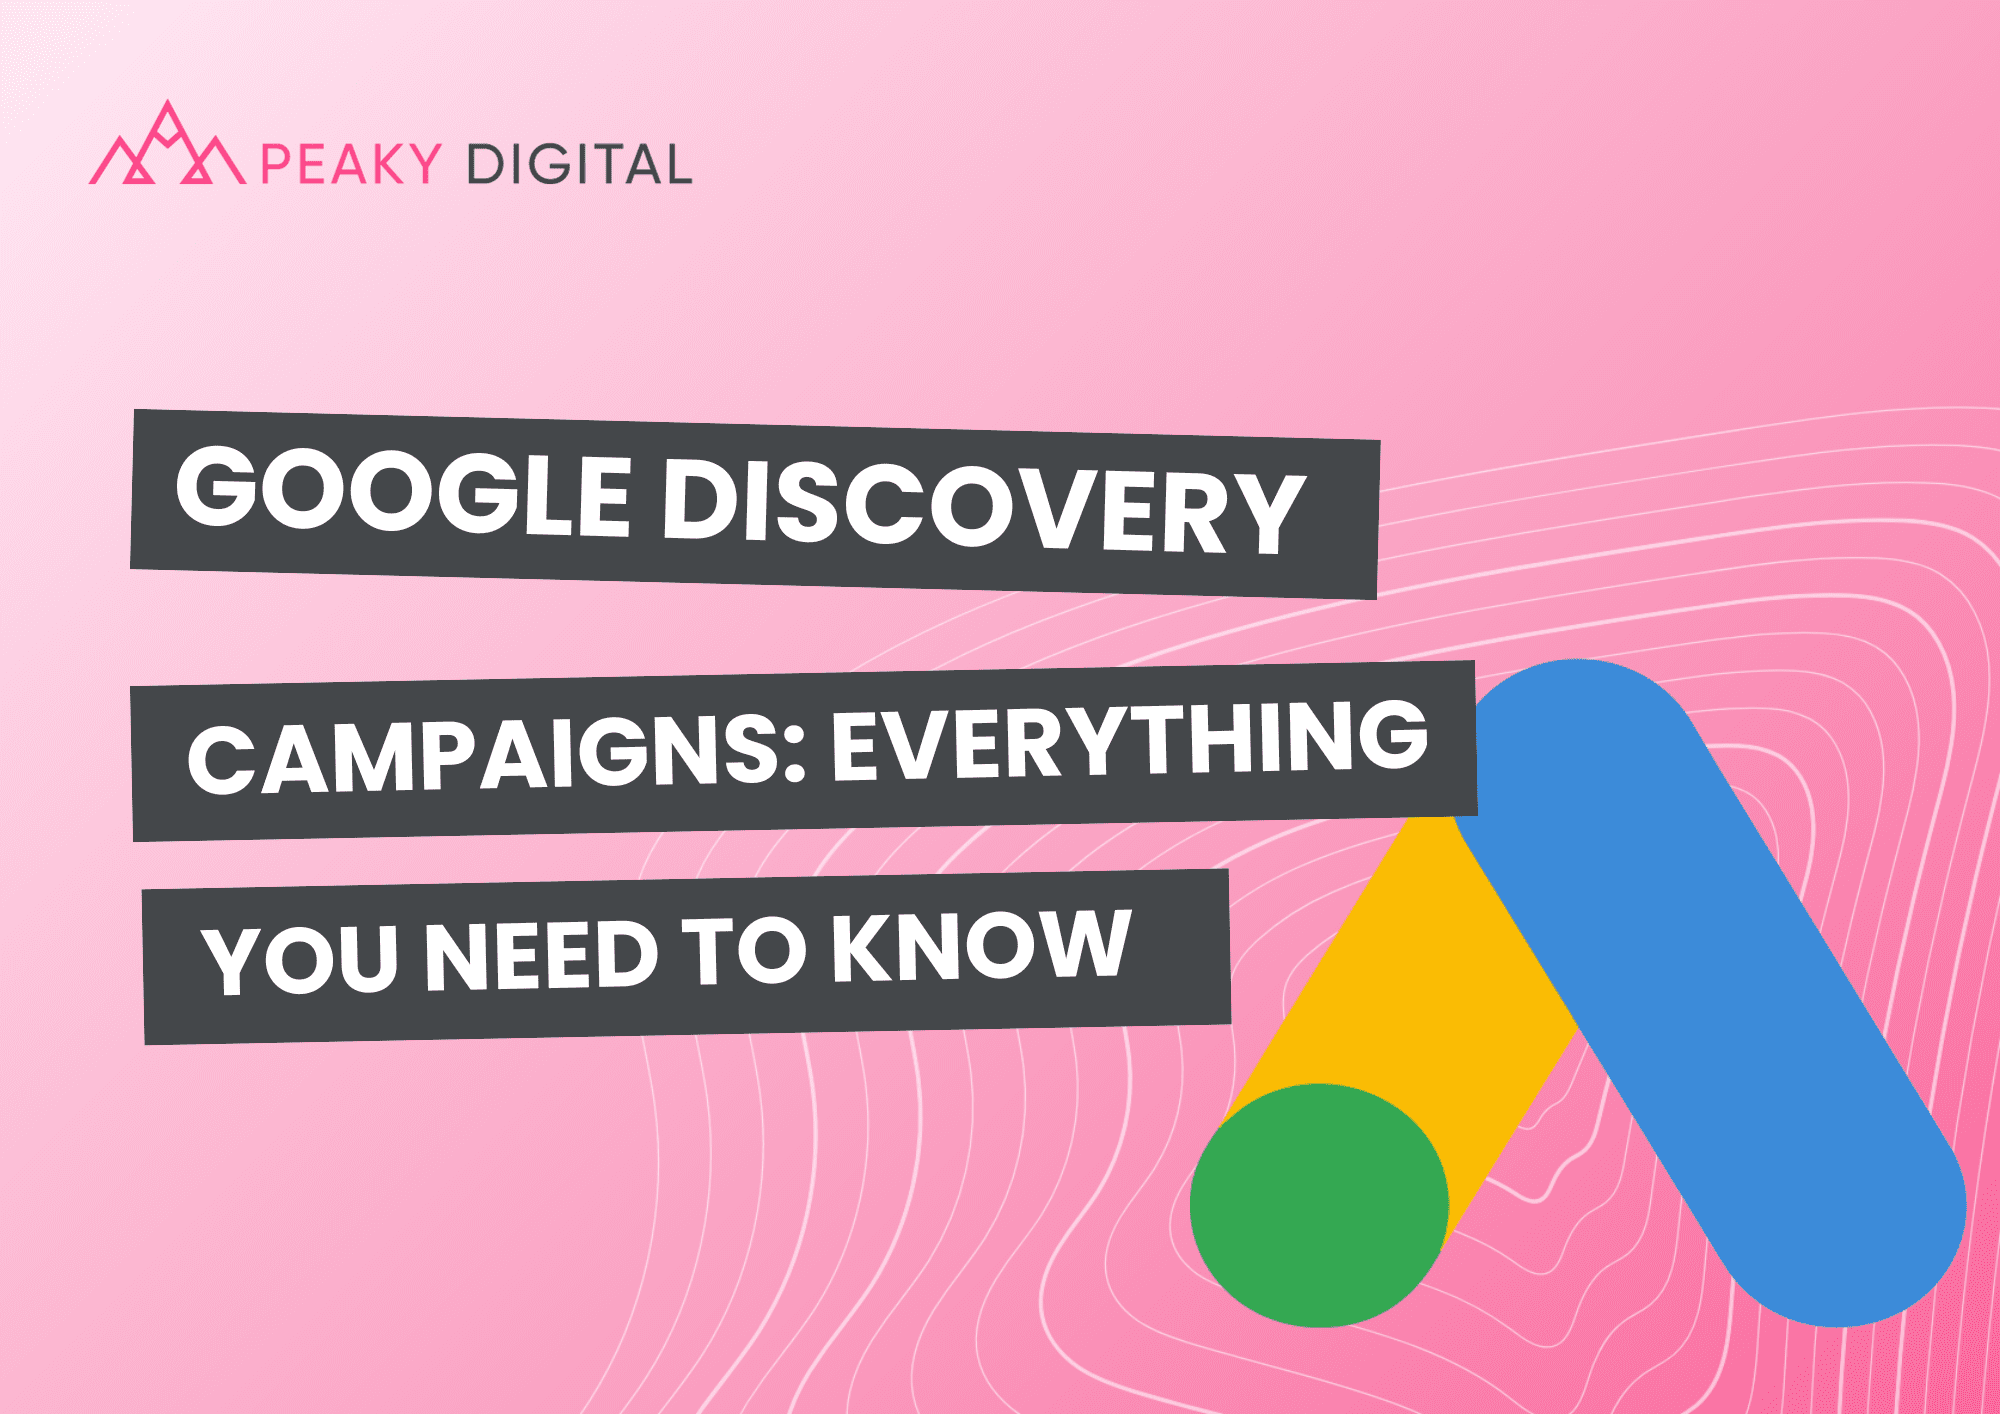 Google Discovery Campaigns: Everything You Need to Know